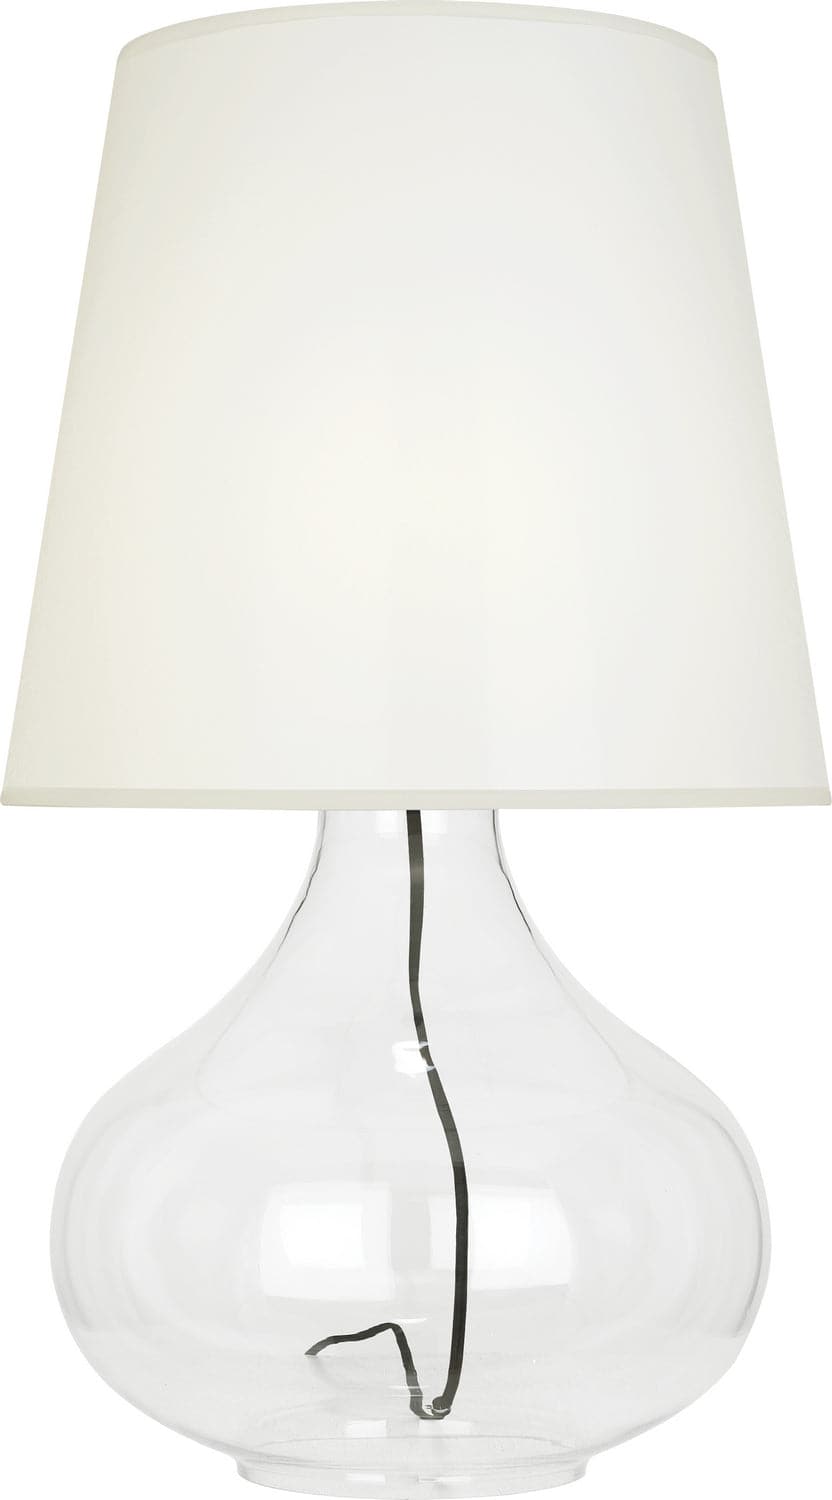 Robert Abbey - 459W - One Light Table Lamp - June - Clear Glass Body w/Black Fabric Wrapped Cord